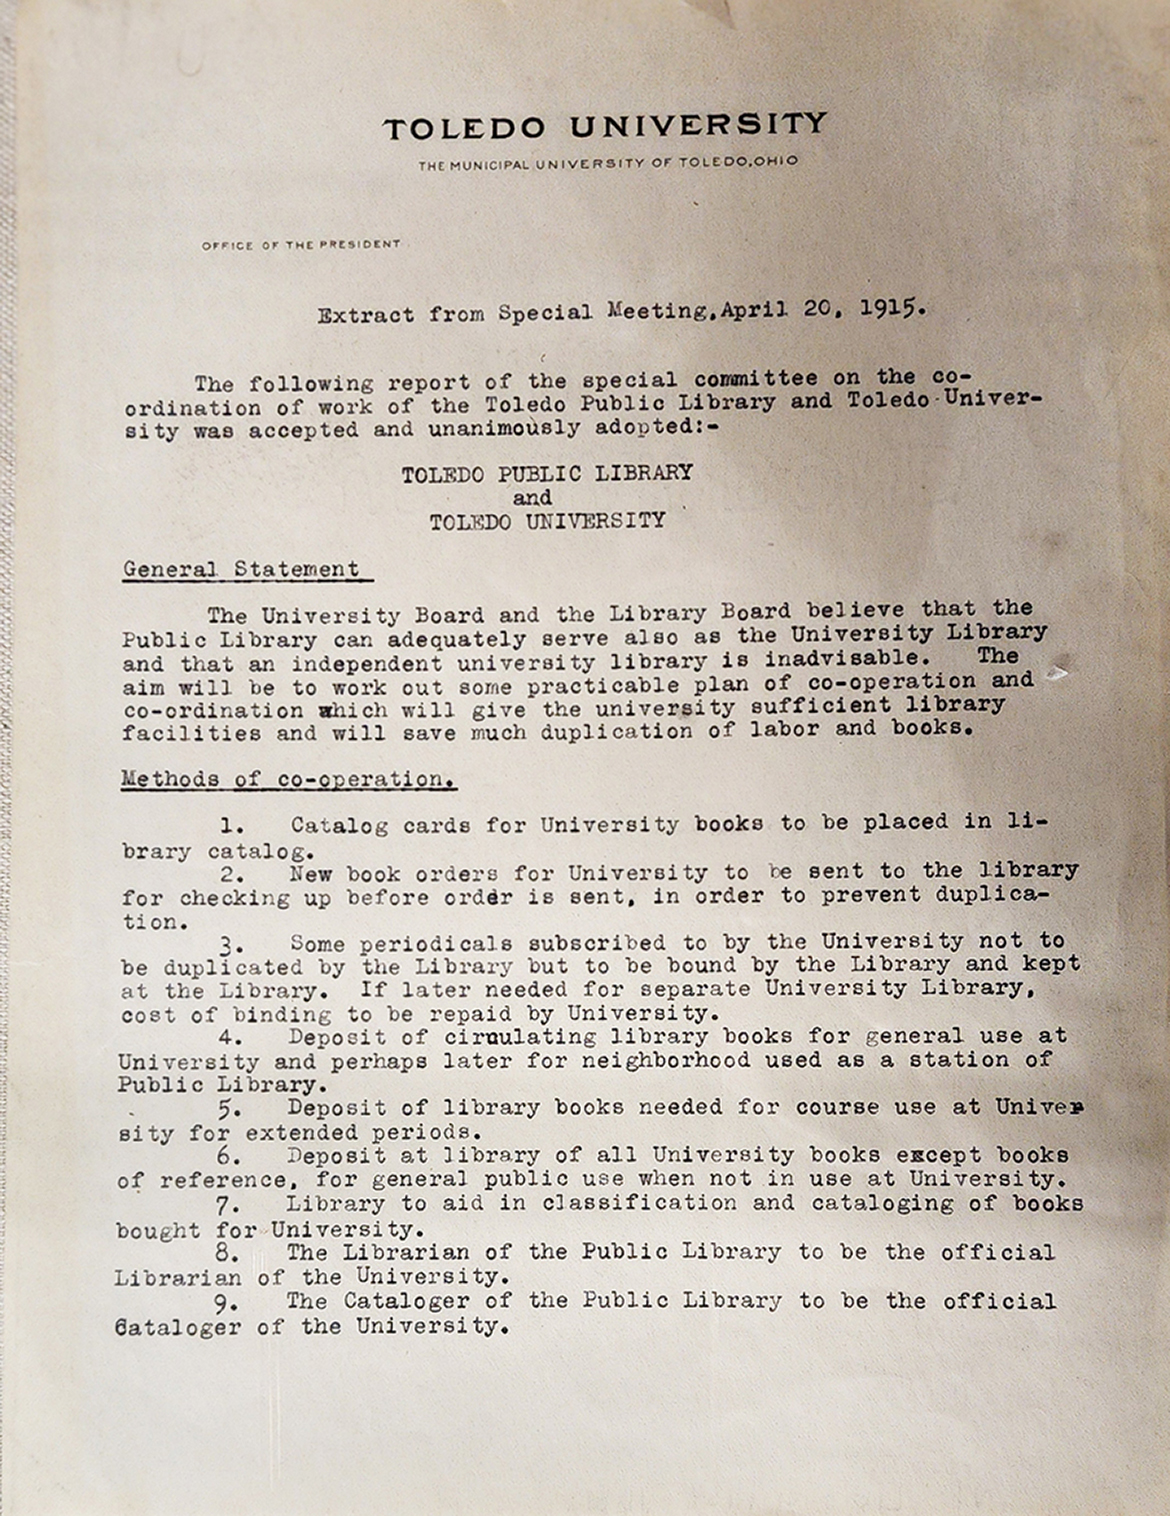 Extract from Special Meeting, April 20, 1915